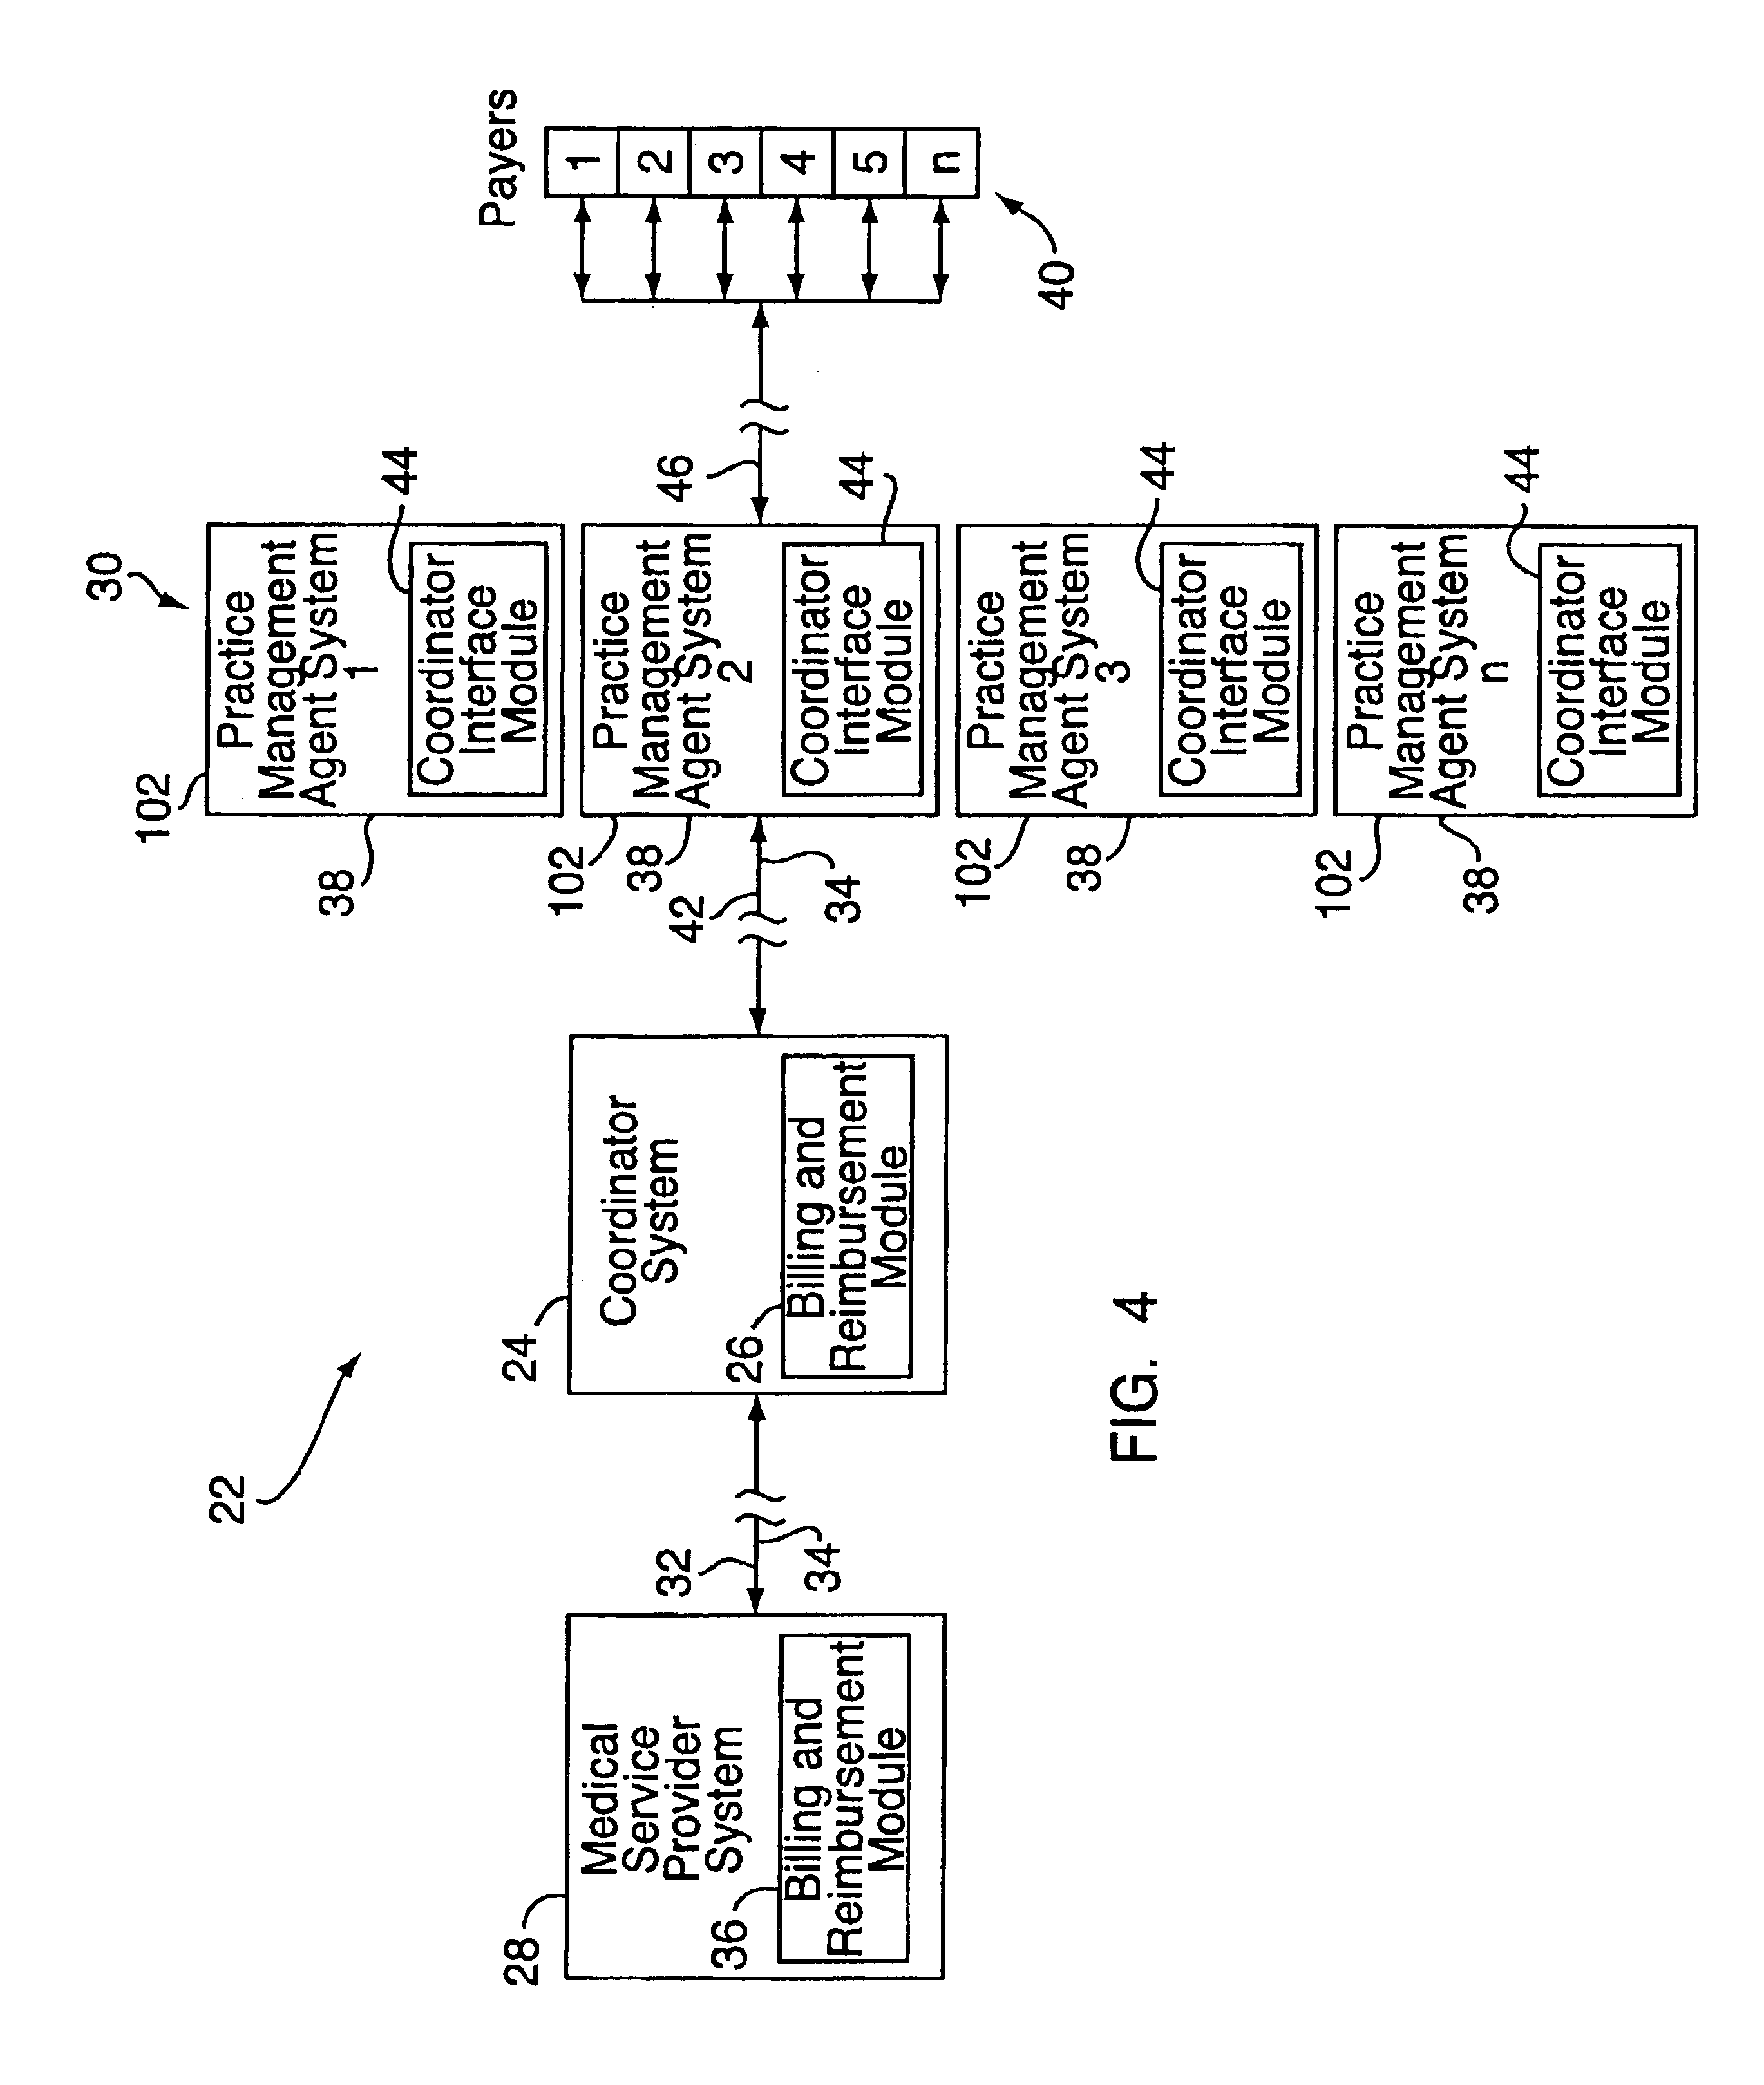 Method and system for providing evaluation data from tracked, formatted administrative data of a service provider